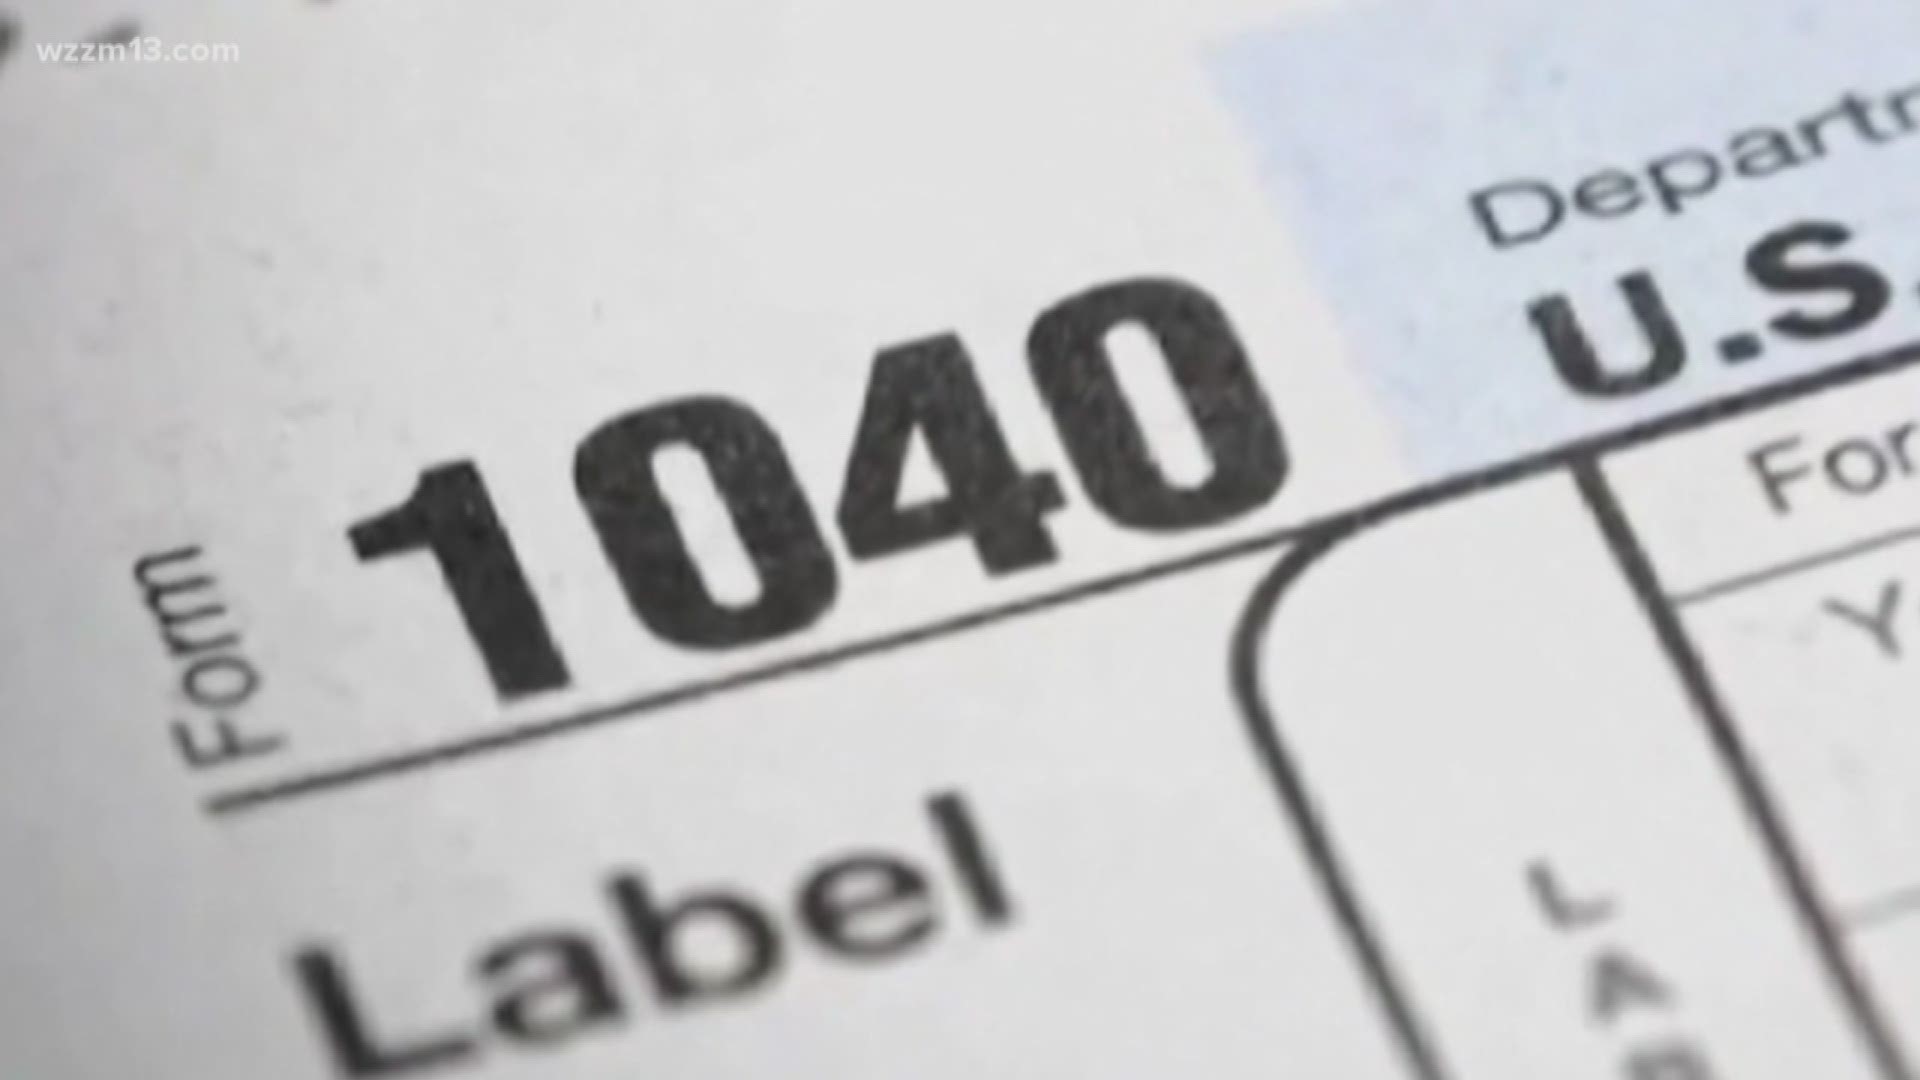 Your tax refund may be smaller than expected.